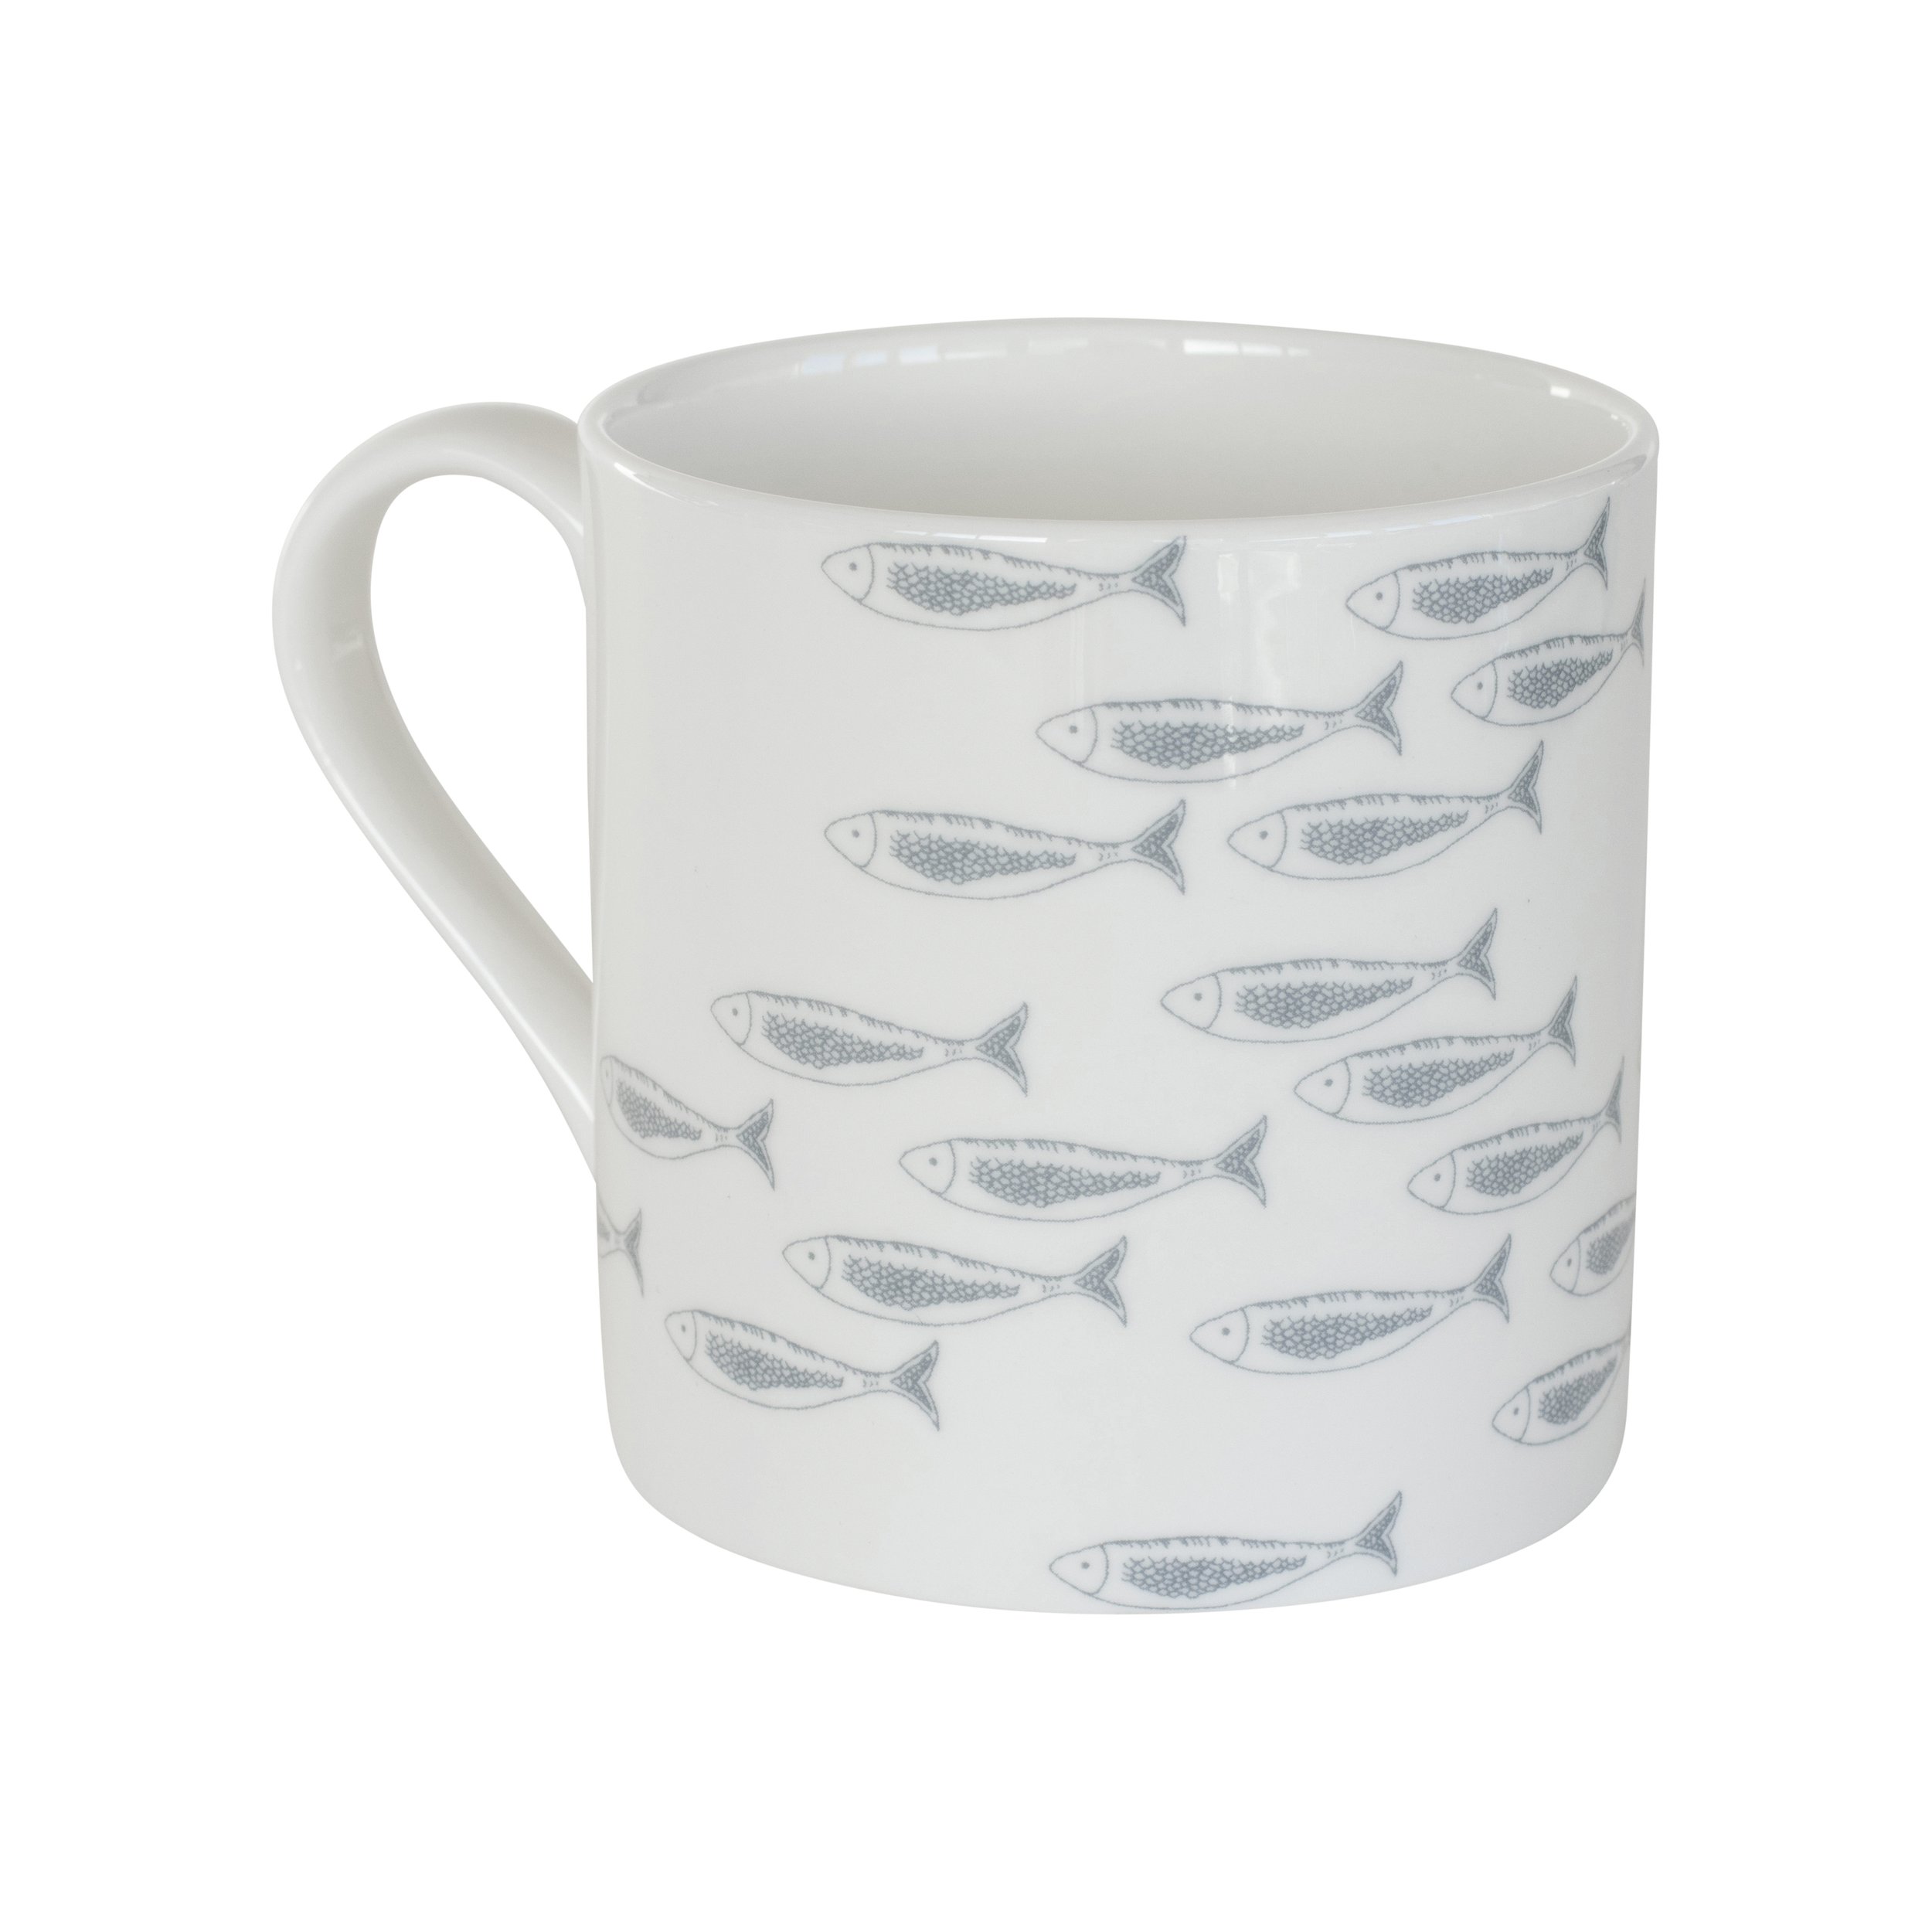 11.HELEN ROUND Fine Bone China Fish Shoal Slate Grey Mug from the Quayside Collection by Helen Round €20.99,